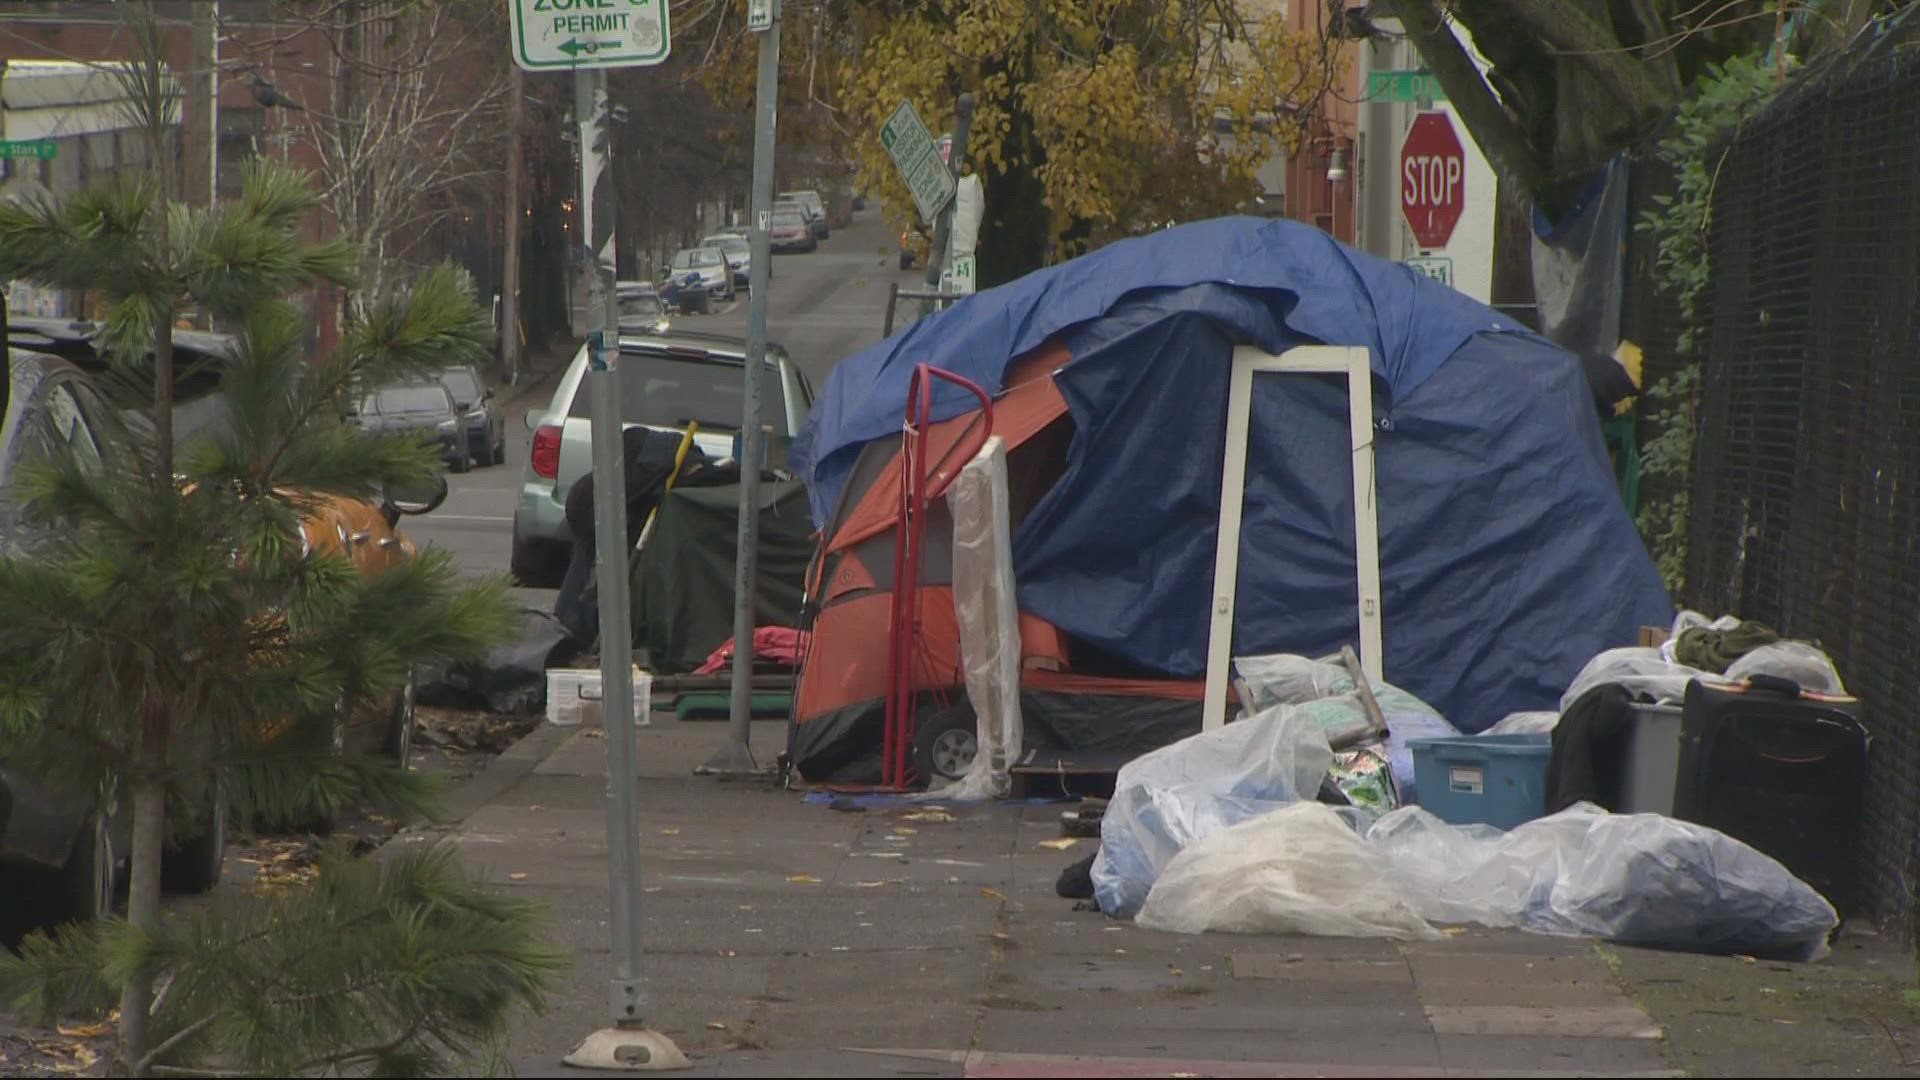 Portland is ramping up campsite removals in the Central Eastside neighborhood in response to the mayor’s 90-day reset plan.